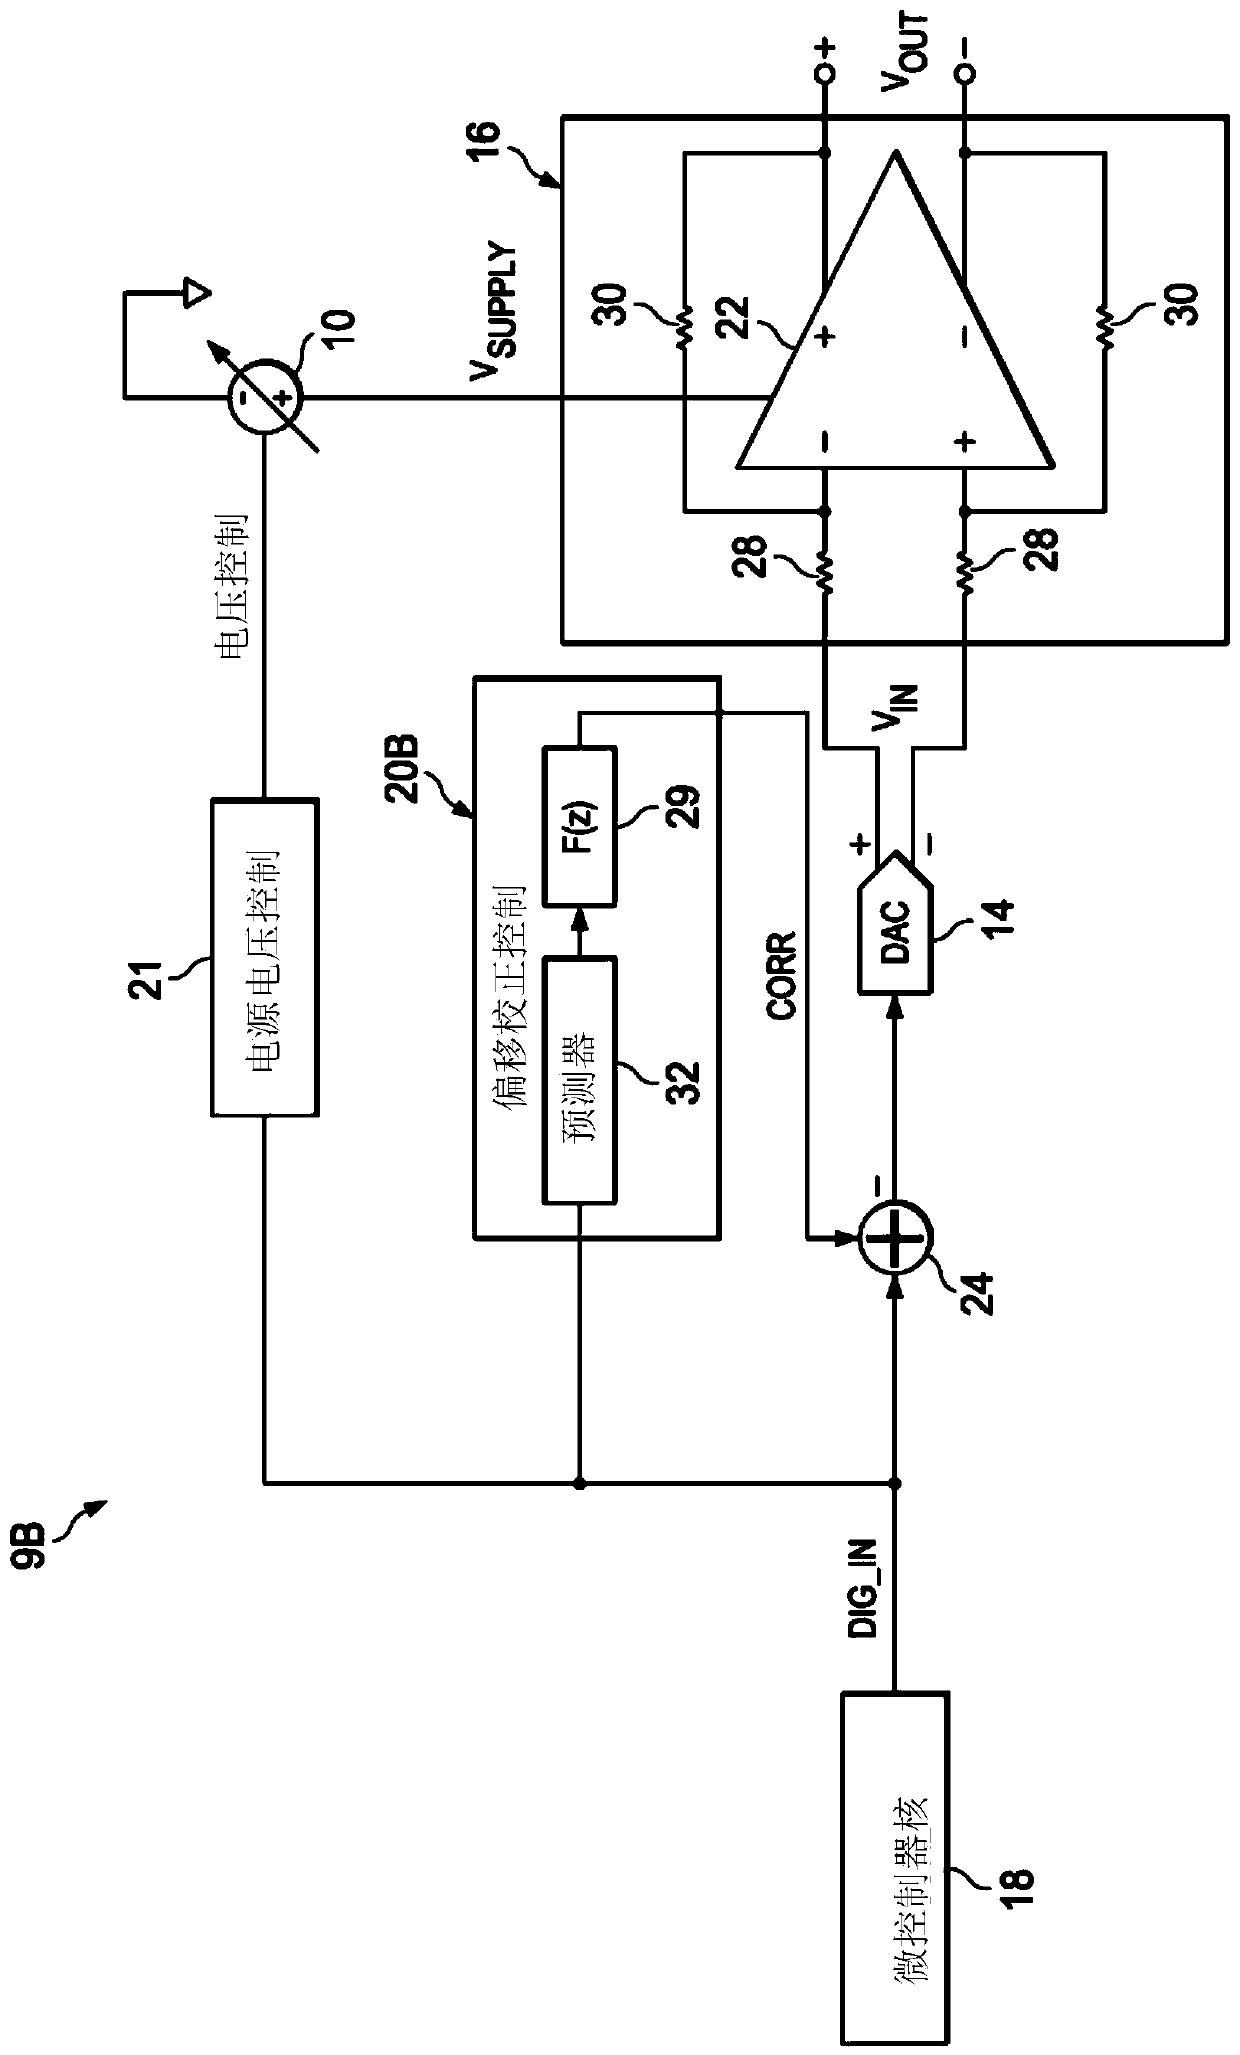 Amplifier offset cancellation using amplifier supply voltage